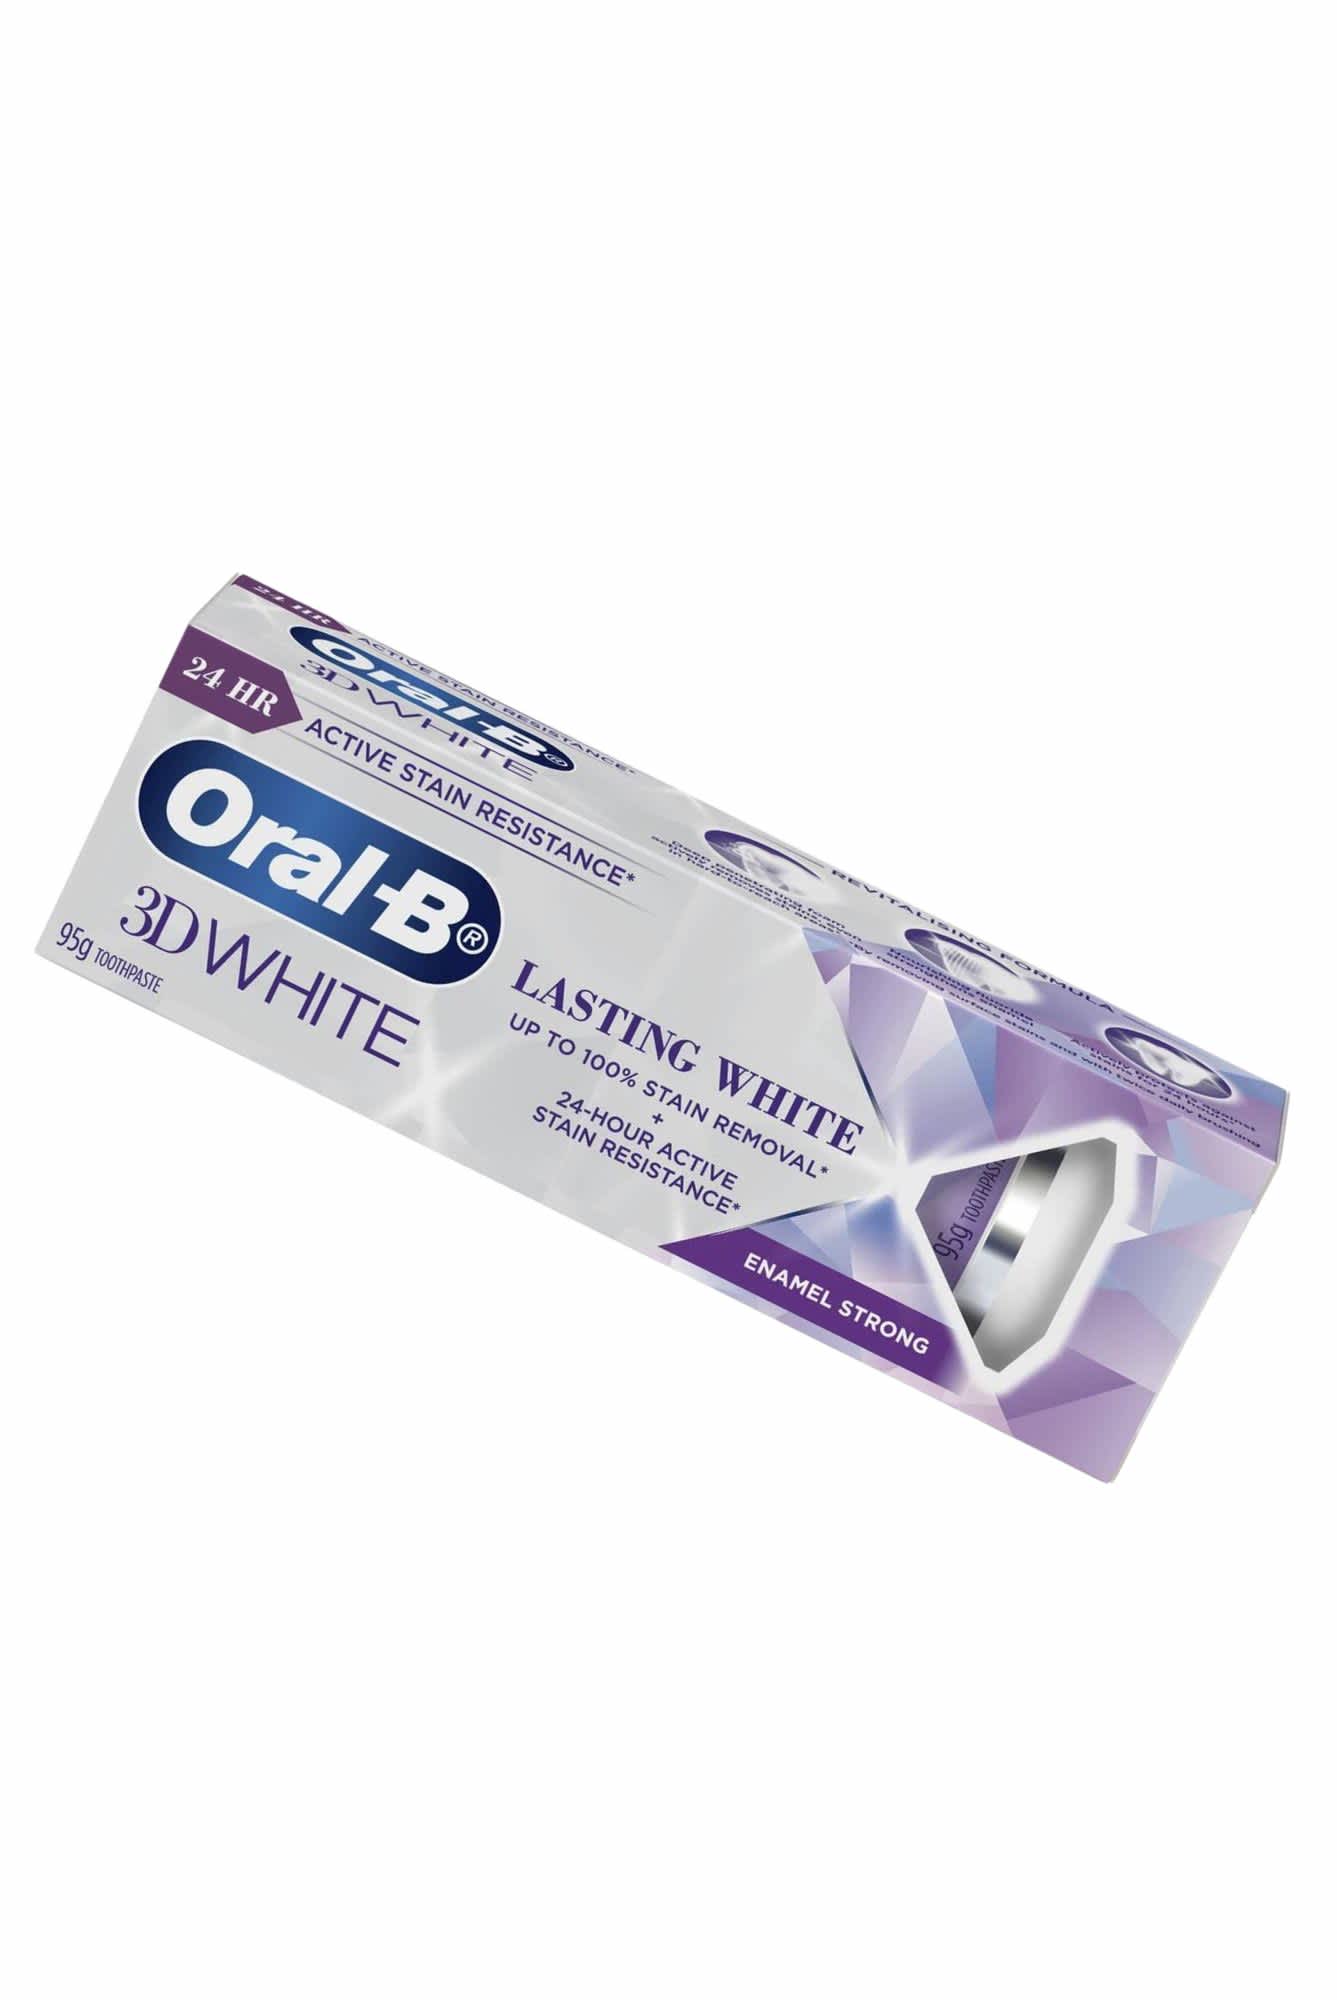 Oral B, 3D Lasting White Enamel Strong Toothpaste ($9)